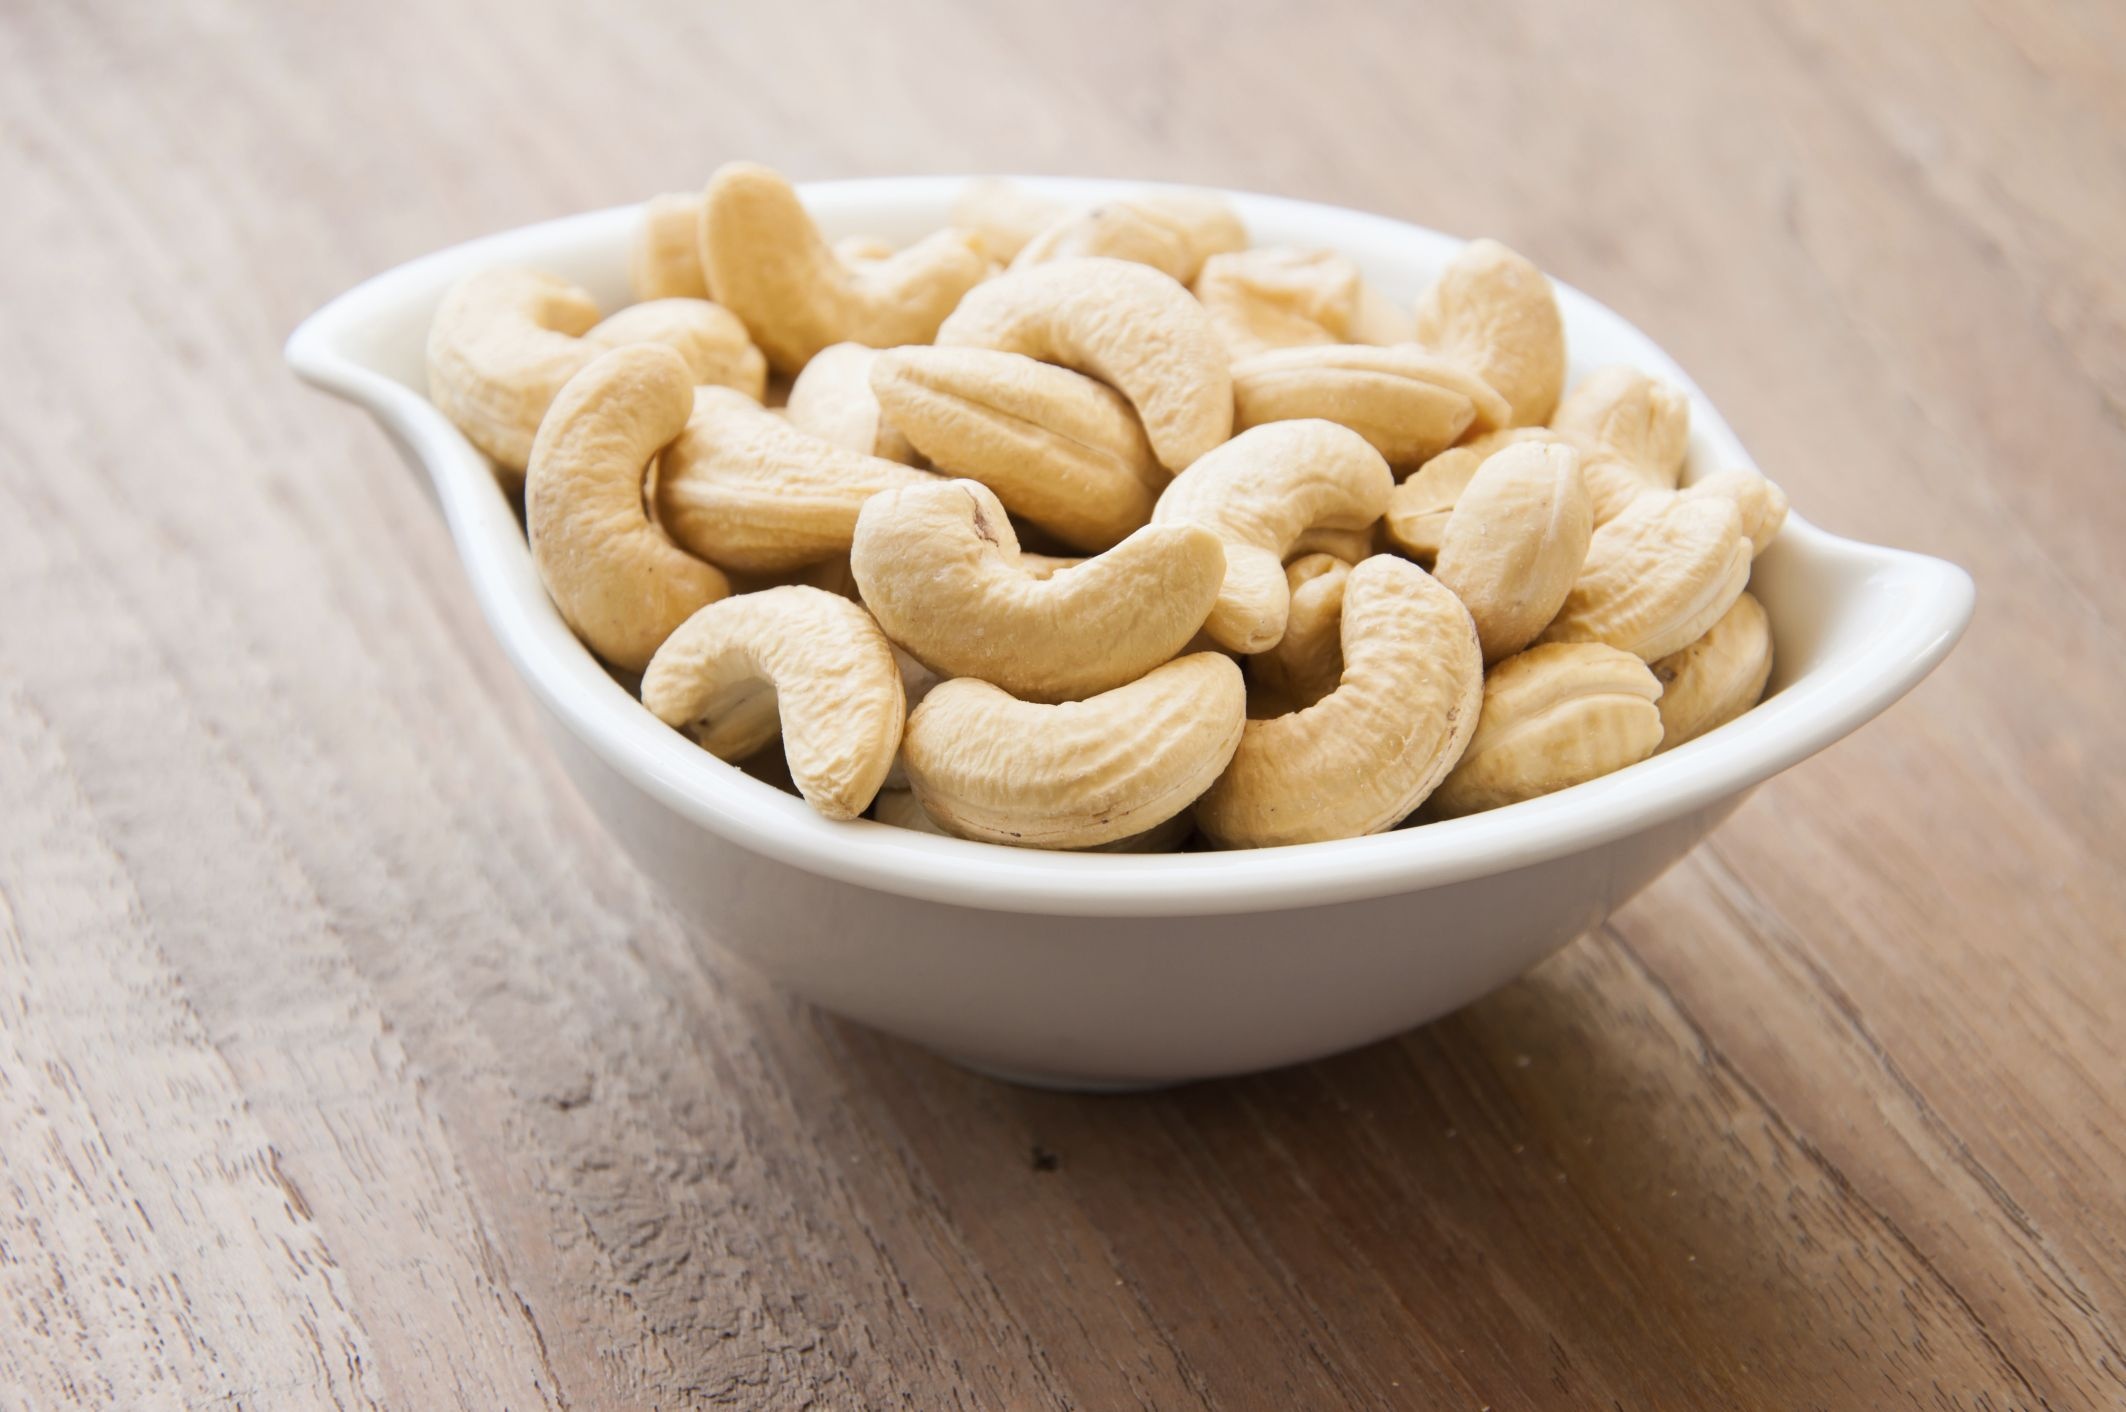 Cashew Nuts: Rich in nutrients and beneficial plant compounds, An easy addition to many dishes. 2130x1420 HD Wallpaper.